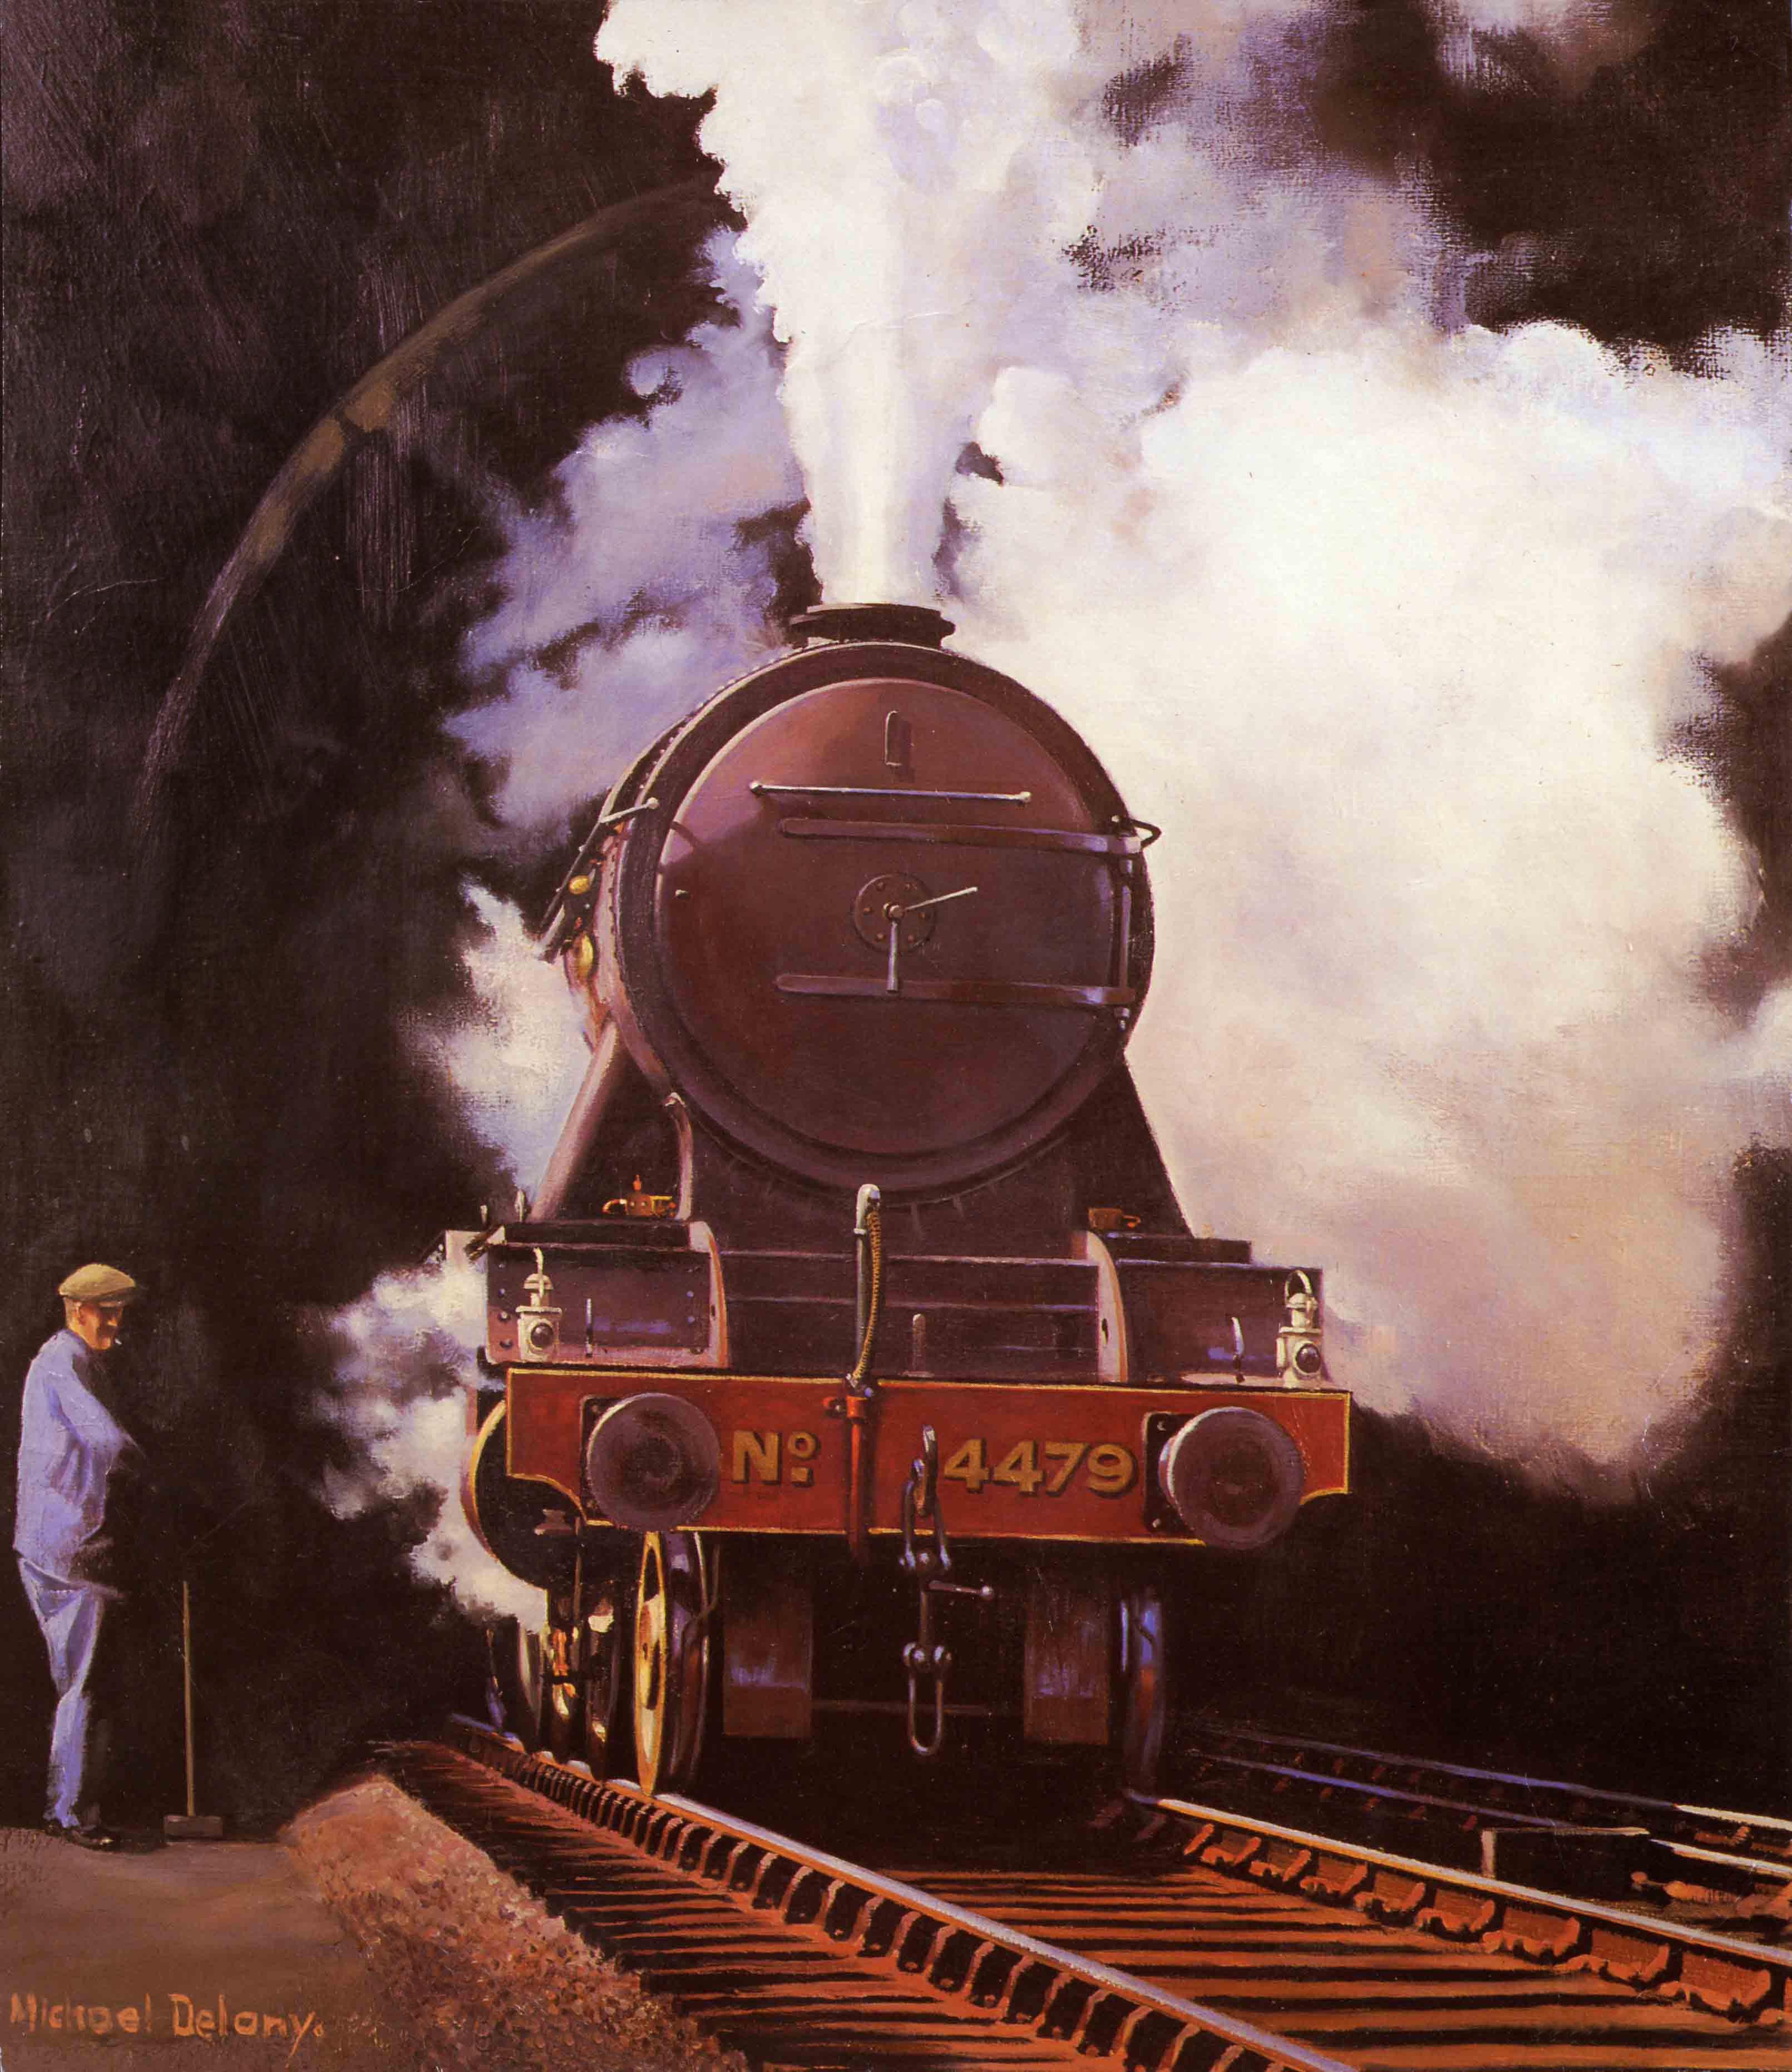 Boris Bennett, who kindly gave me a print of this painting, wrote: Class A1 No. 4479 'Robert the Devil' was built at Doncaster in 1923. She was allocated to Grantham shed in July 1923 and remained there until January 1942 when she was transferred to New England shed (Peterborough). Returning to Grantham from October 1942 she went to King's Cross in October 1946 and came back to Grantham for the last time in September 1951. Then back to King's Cross in June 1957 and withdrawn in May 1963. Whilst at Grantham she was kept in pristine condition and allocated to all the top drivers. At the time I started at Grantham in November 1939 she was allocated to driver W. Carman and fireman Rodgers, still in beuatiful condition. She is seen here rebuilt to class A3 as she leaves Copenhagen Tunnel with a Down express for Newcastle. From a painting by Michael Delany.